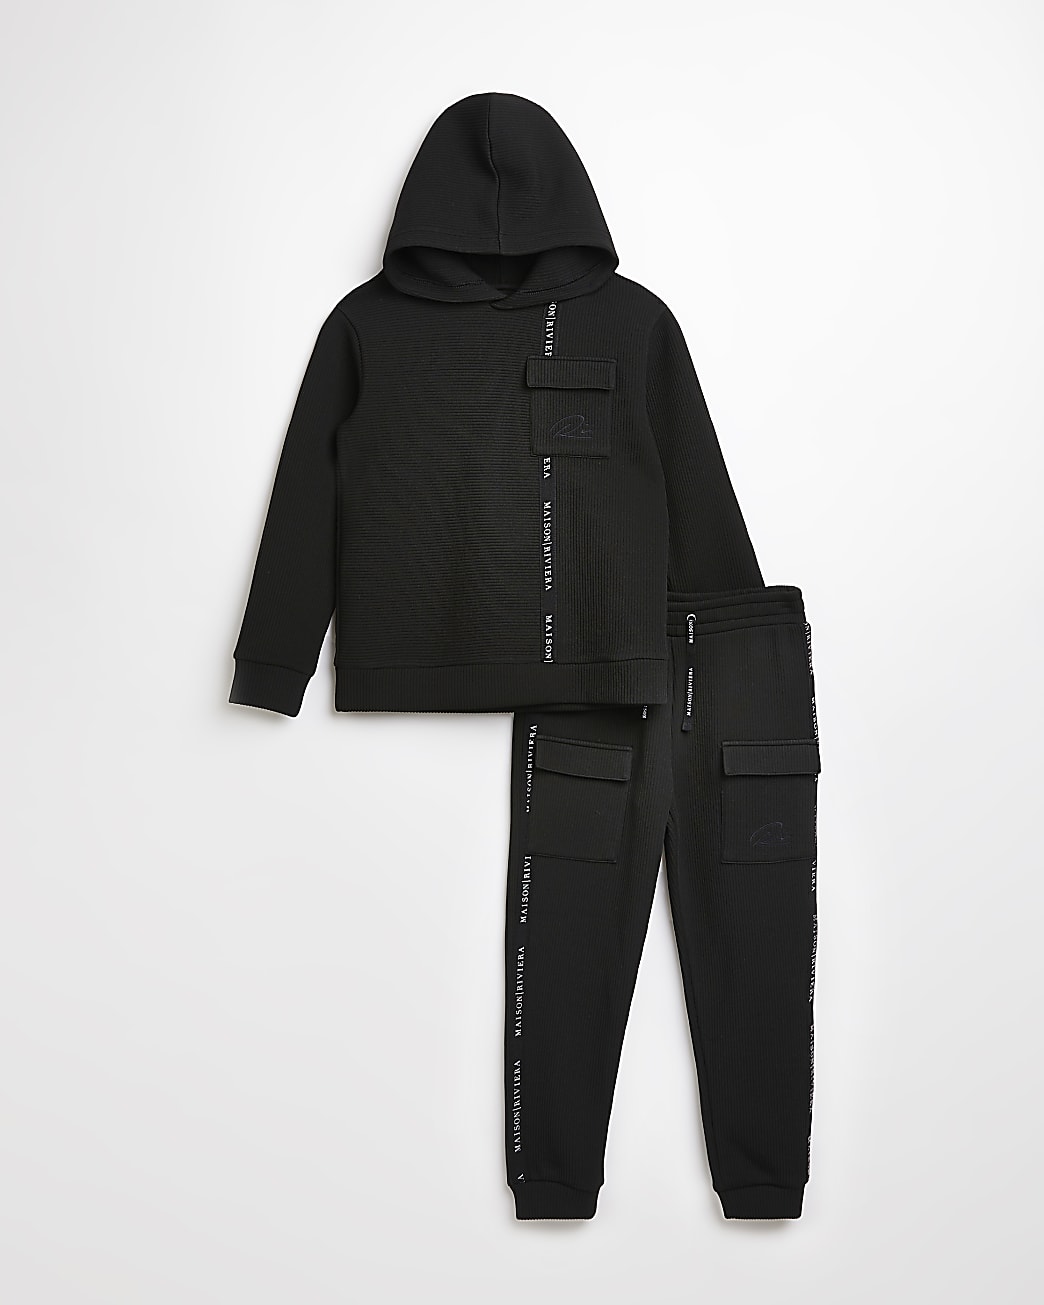 Boys black Maison Riviera hoodie outfit